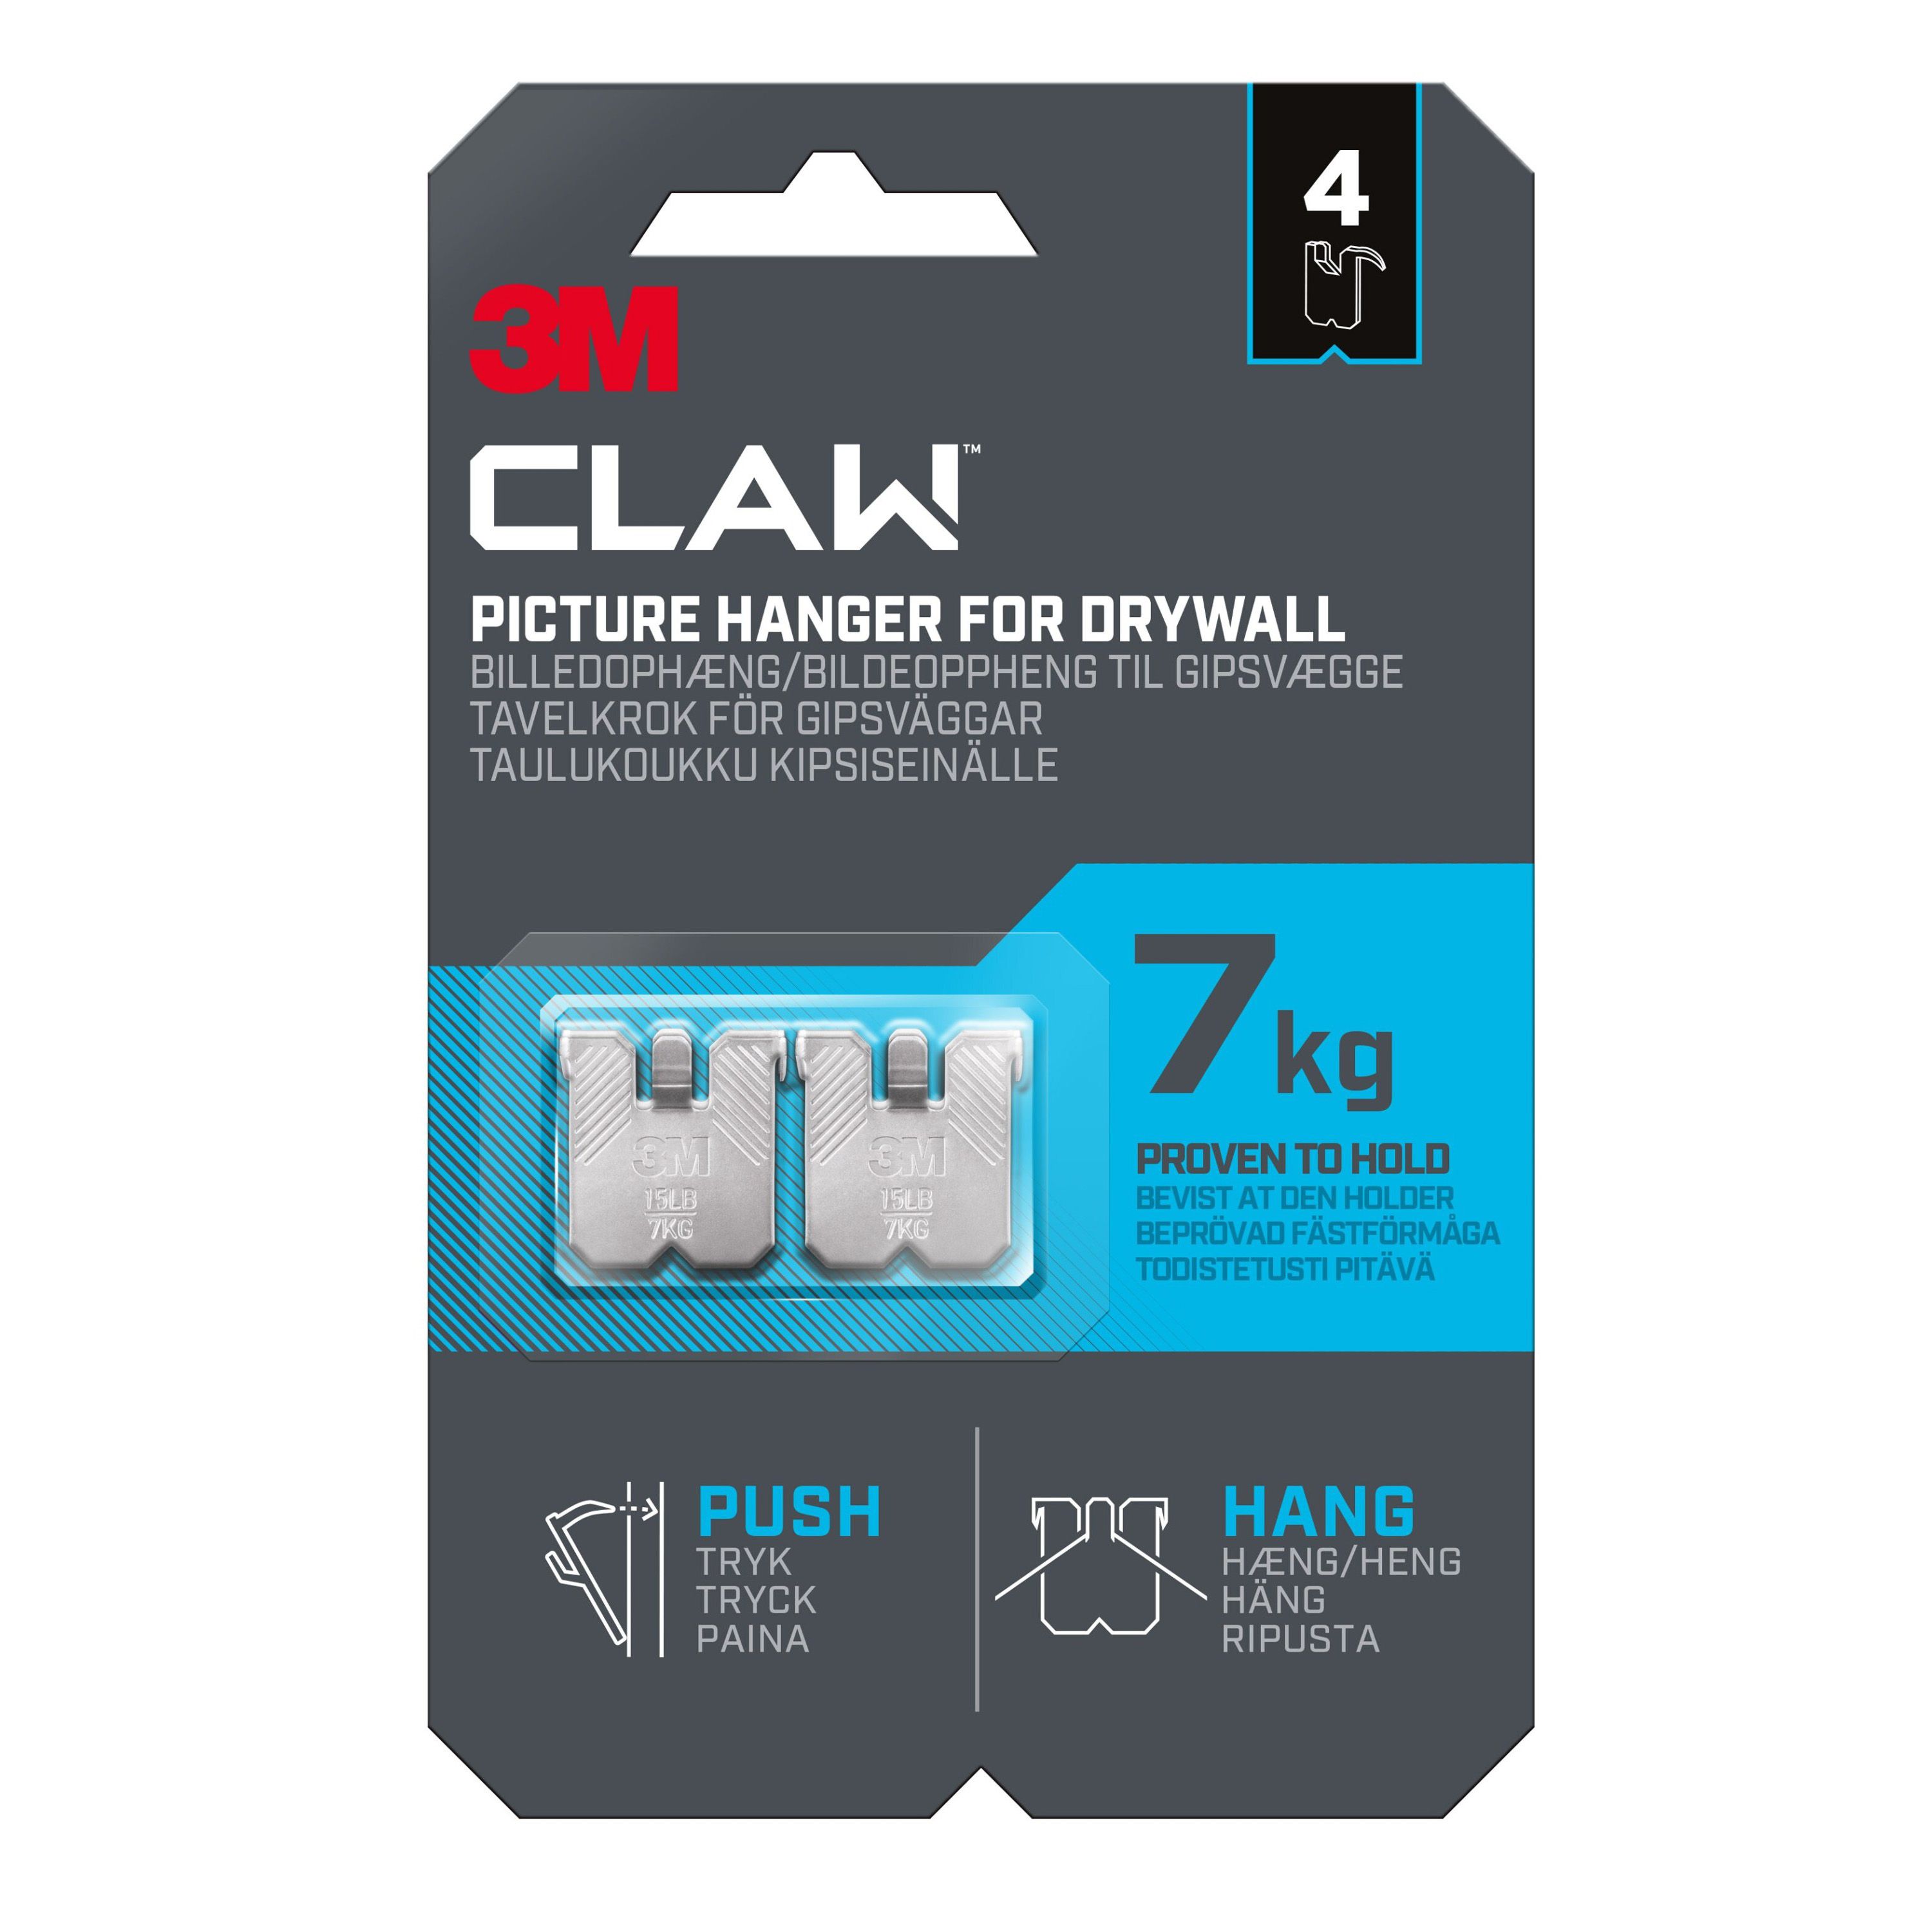 https://media.diy.com/is/image/Kingfisher/3m-claw-drywall-picture-hanger-h-23mm-w-23mm-pack-of-4~4064035002275_01c_bq?$MOB_PREV$&$width=768&$height=768